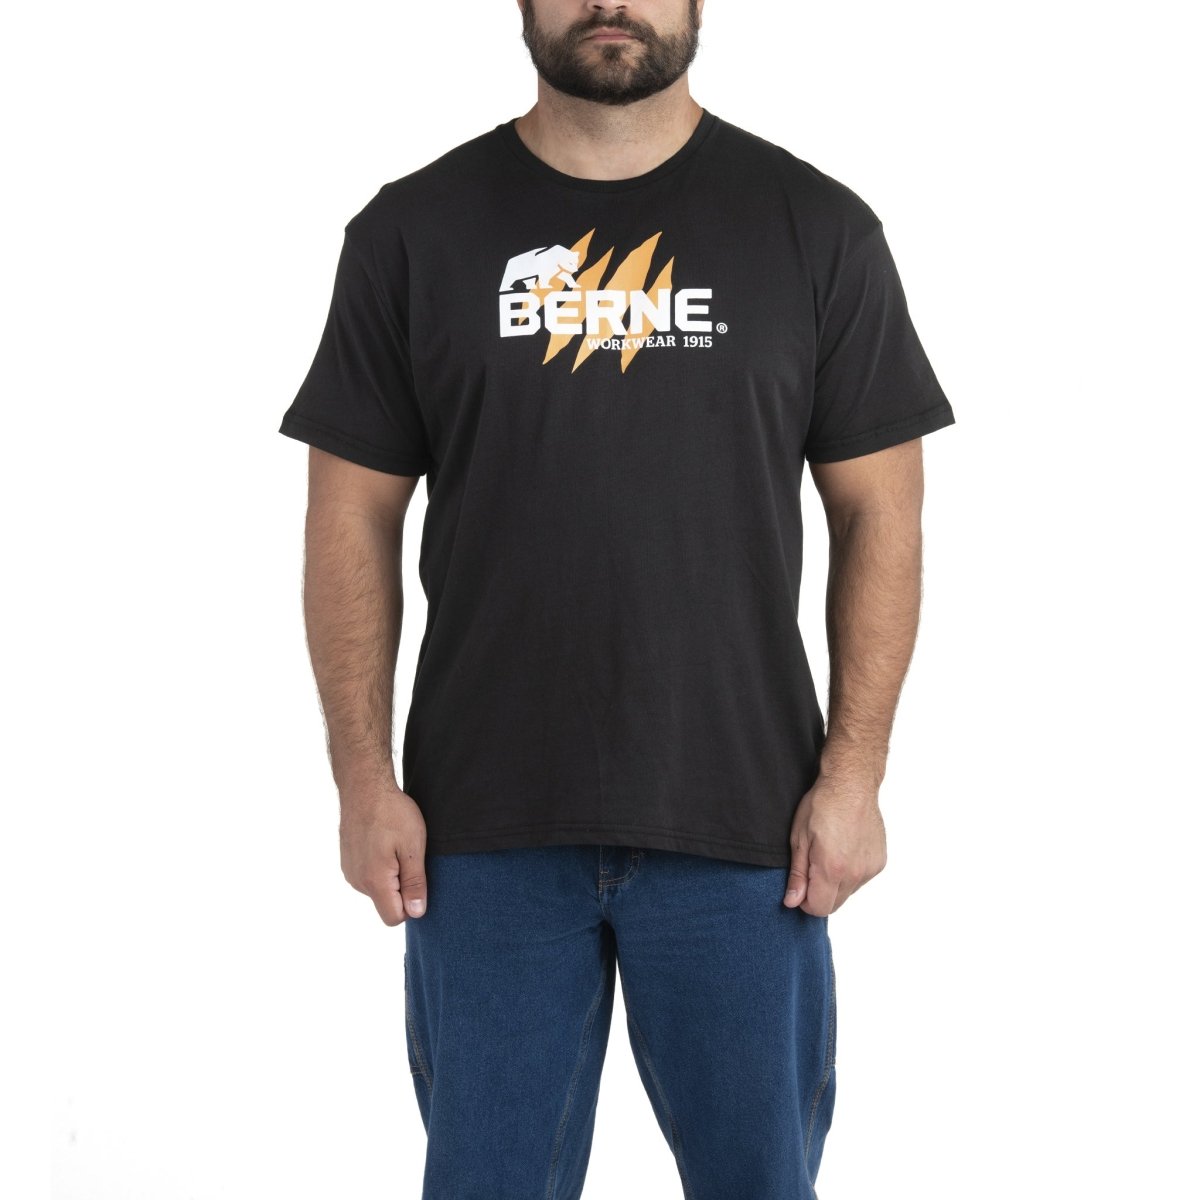 Claw Mark Graphic Tee - Berne Apparel